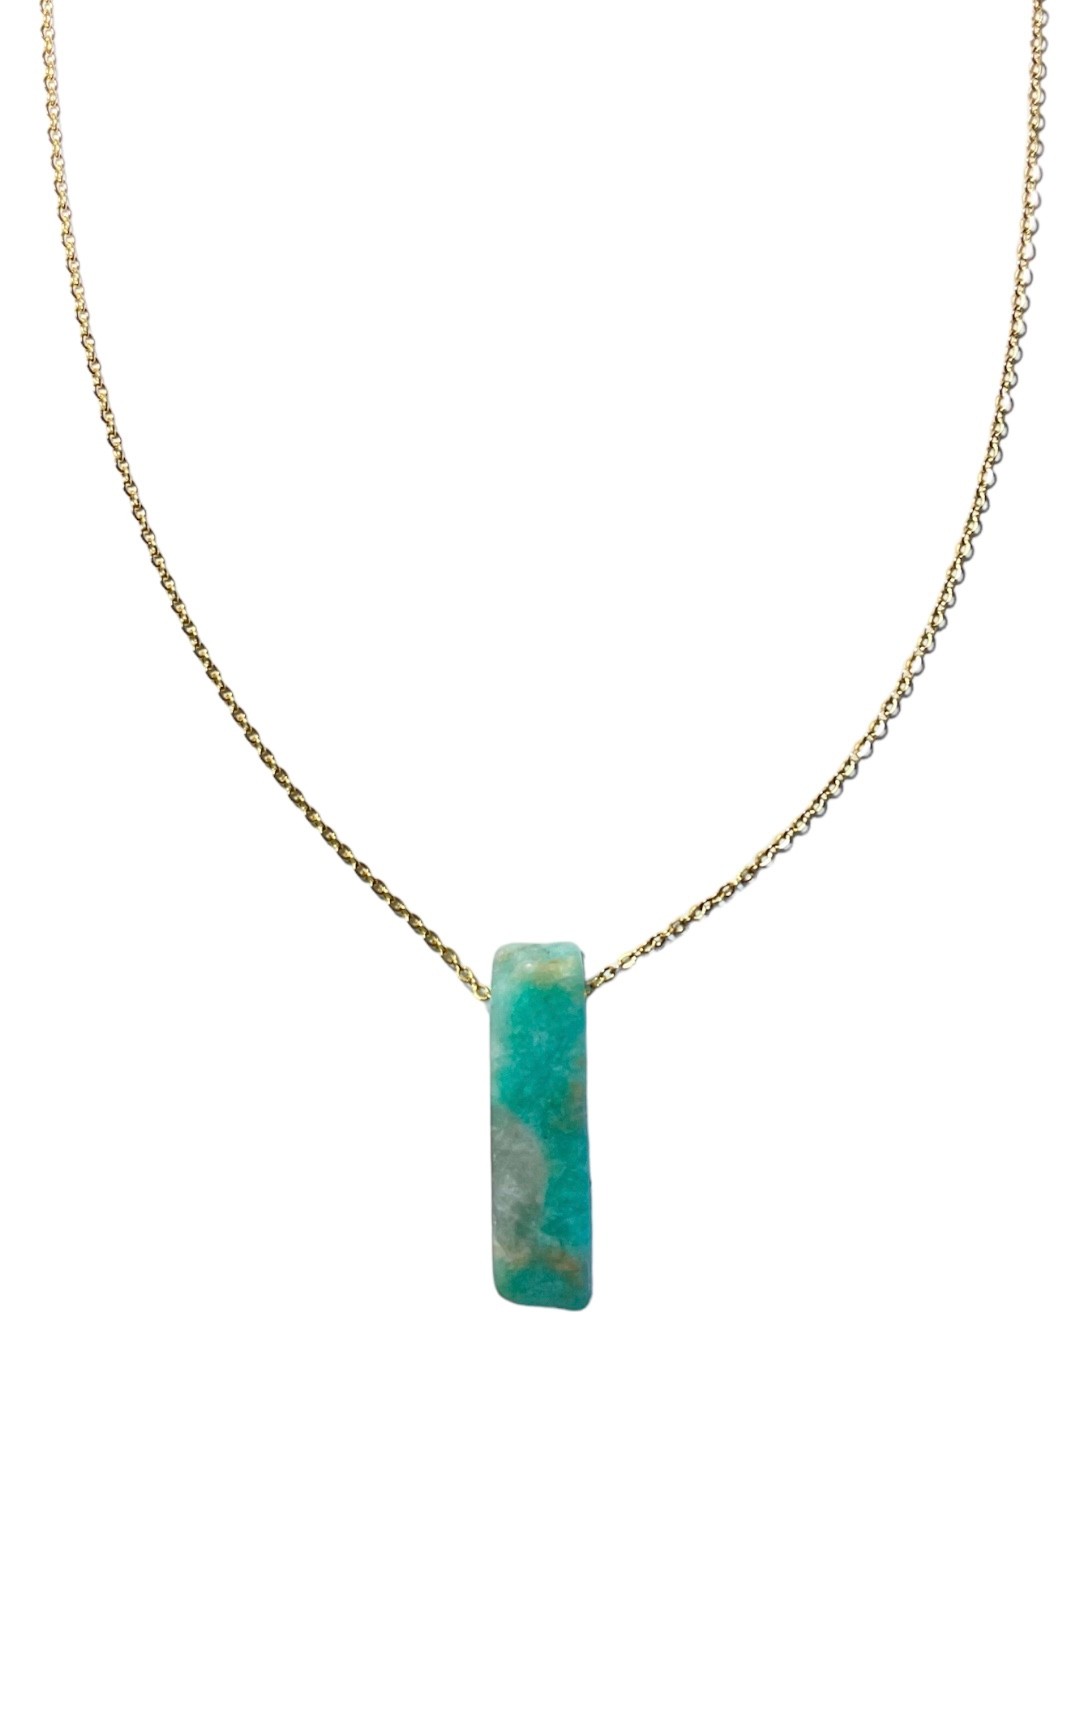  Amazonite, 18k gold plated natural stone necklace on steel